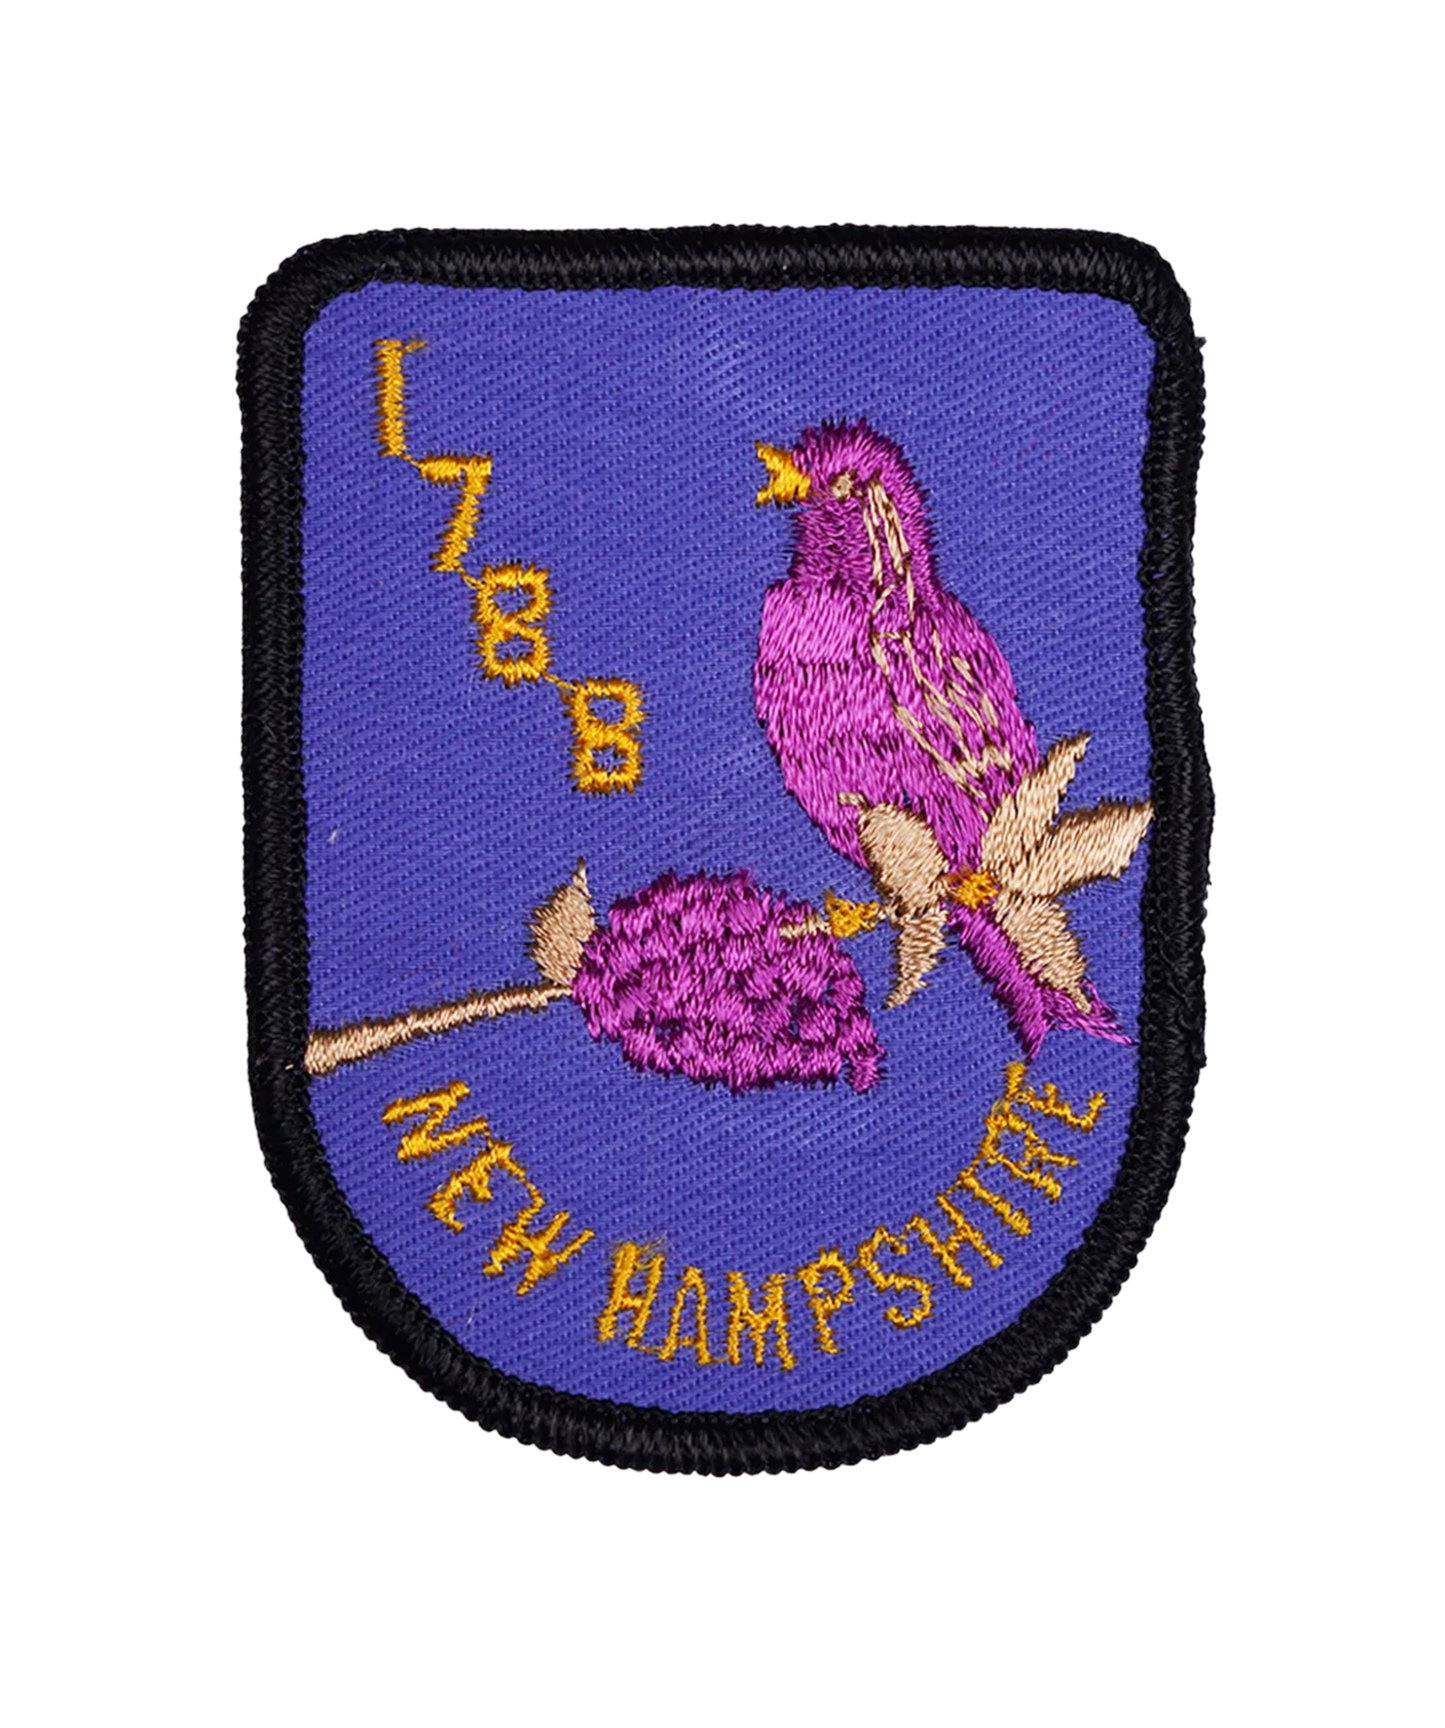 Vintage New Hampshire Embroidered Patch